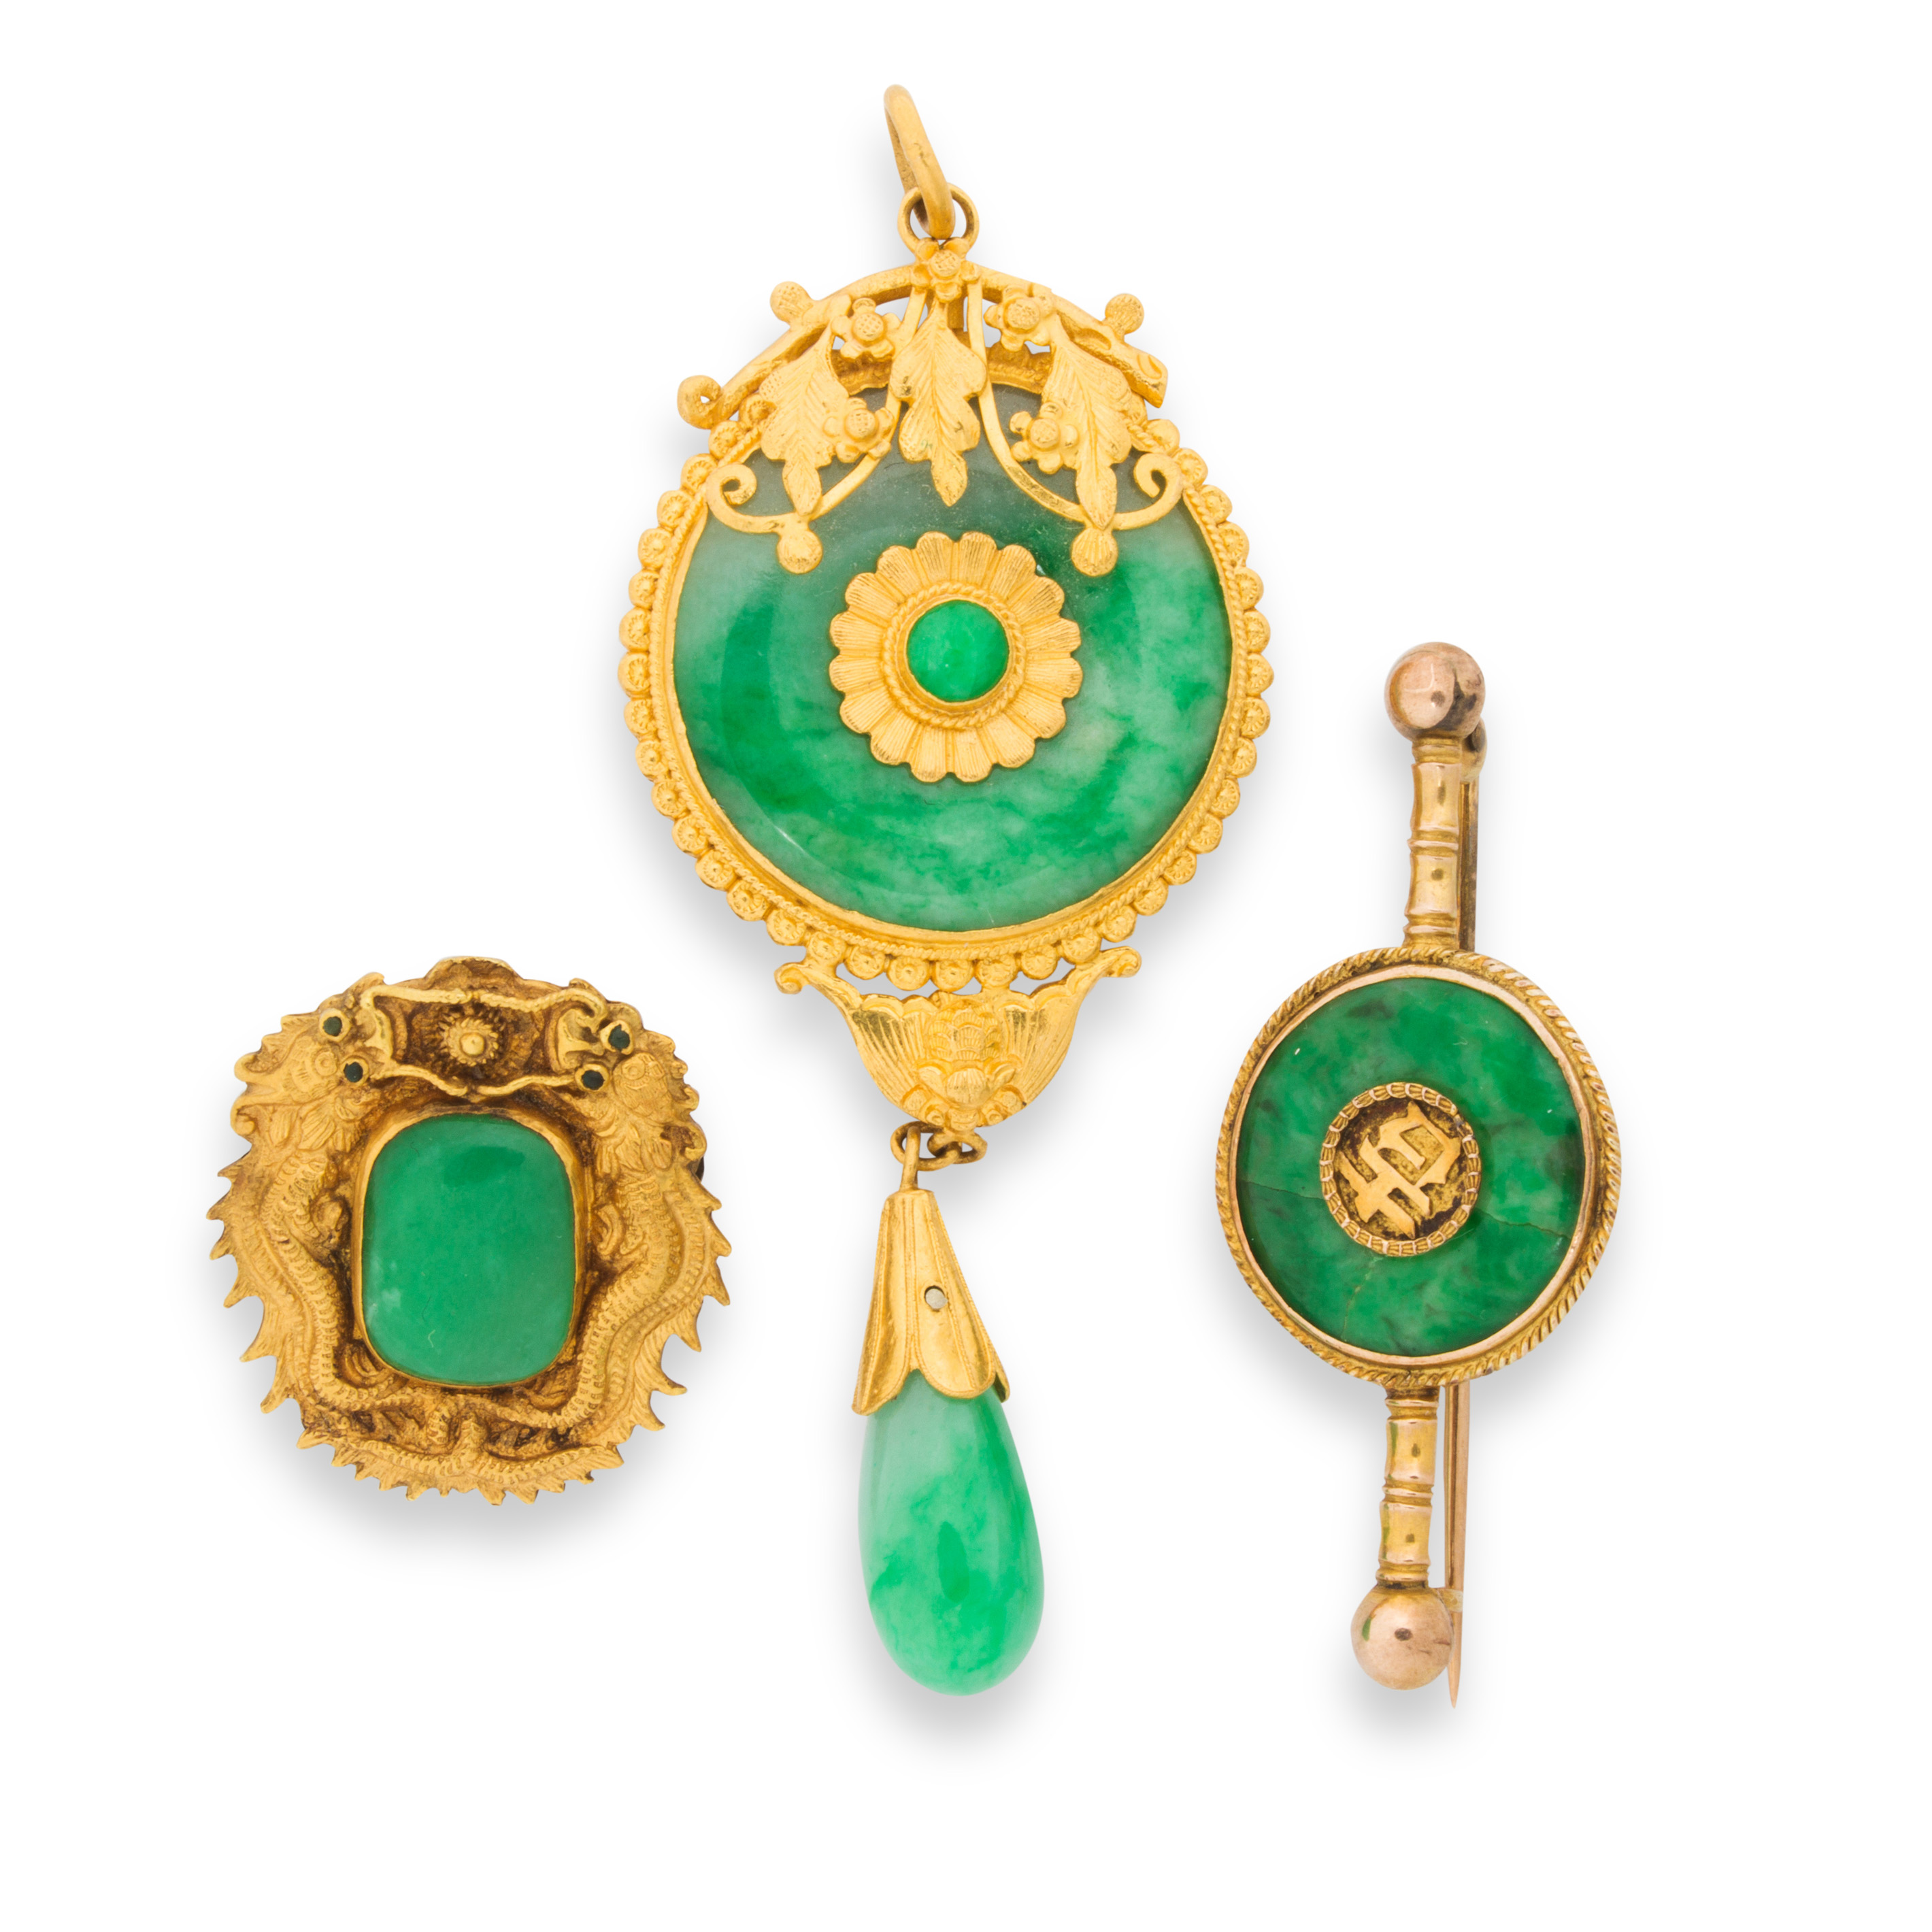 A GROUP OF JADE AND GOLD JEWELRY 3a4212